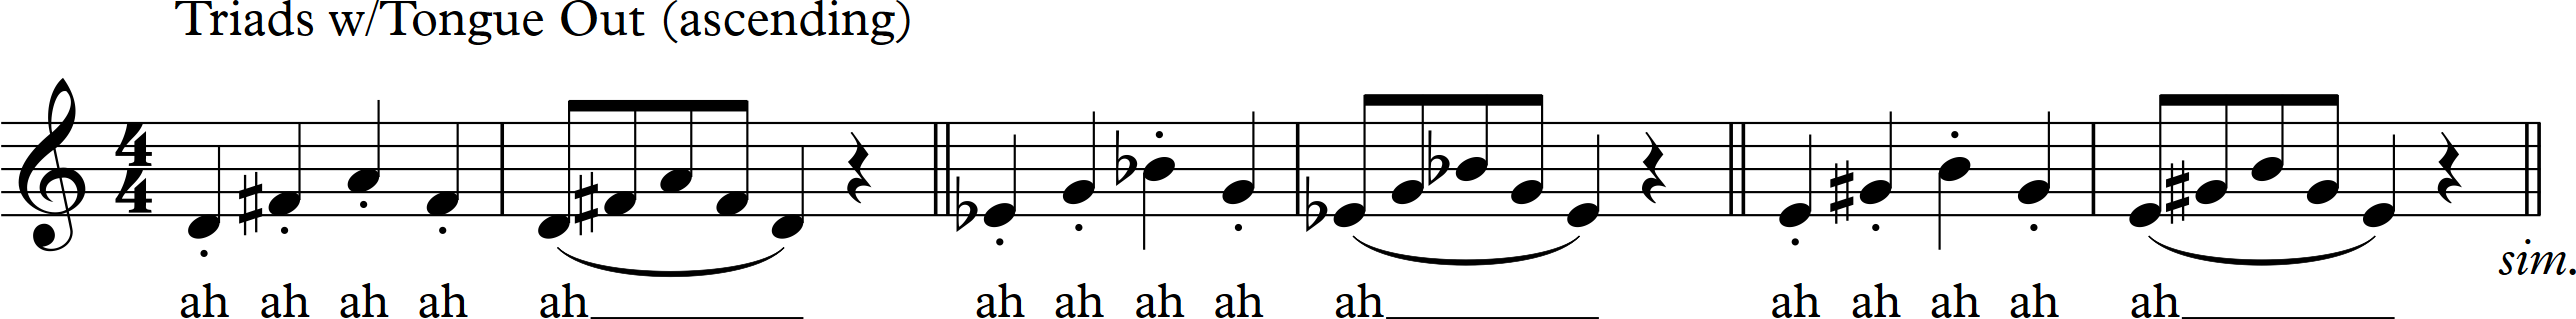 Triads with Tongue Out (ascending)